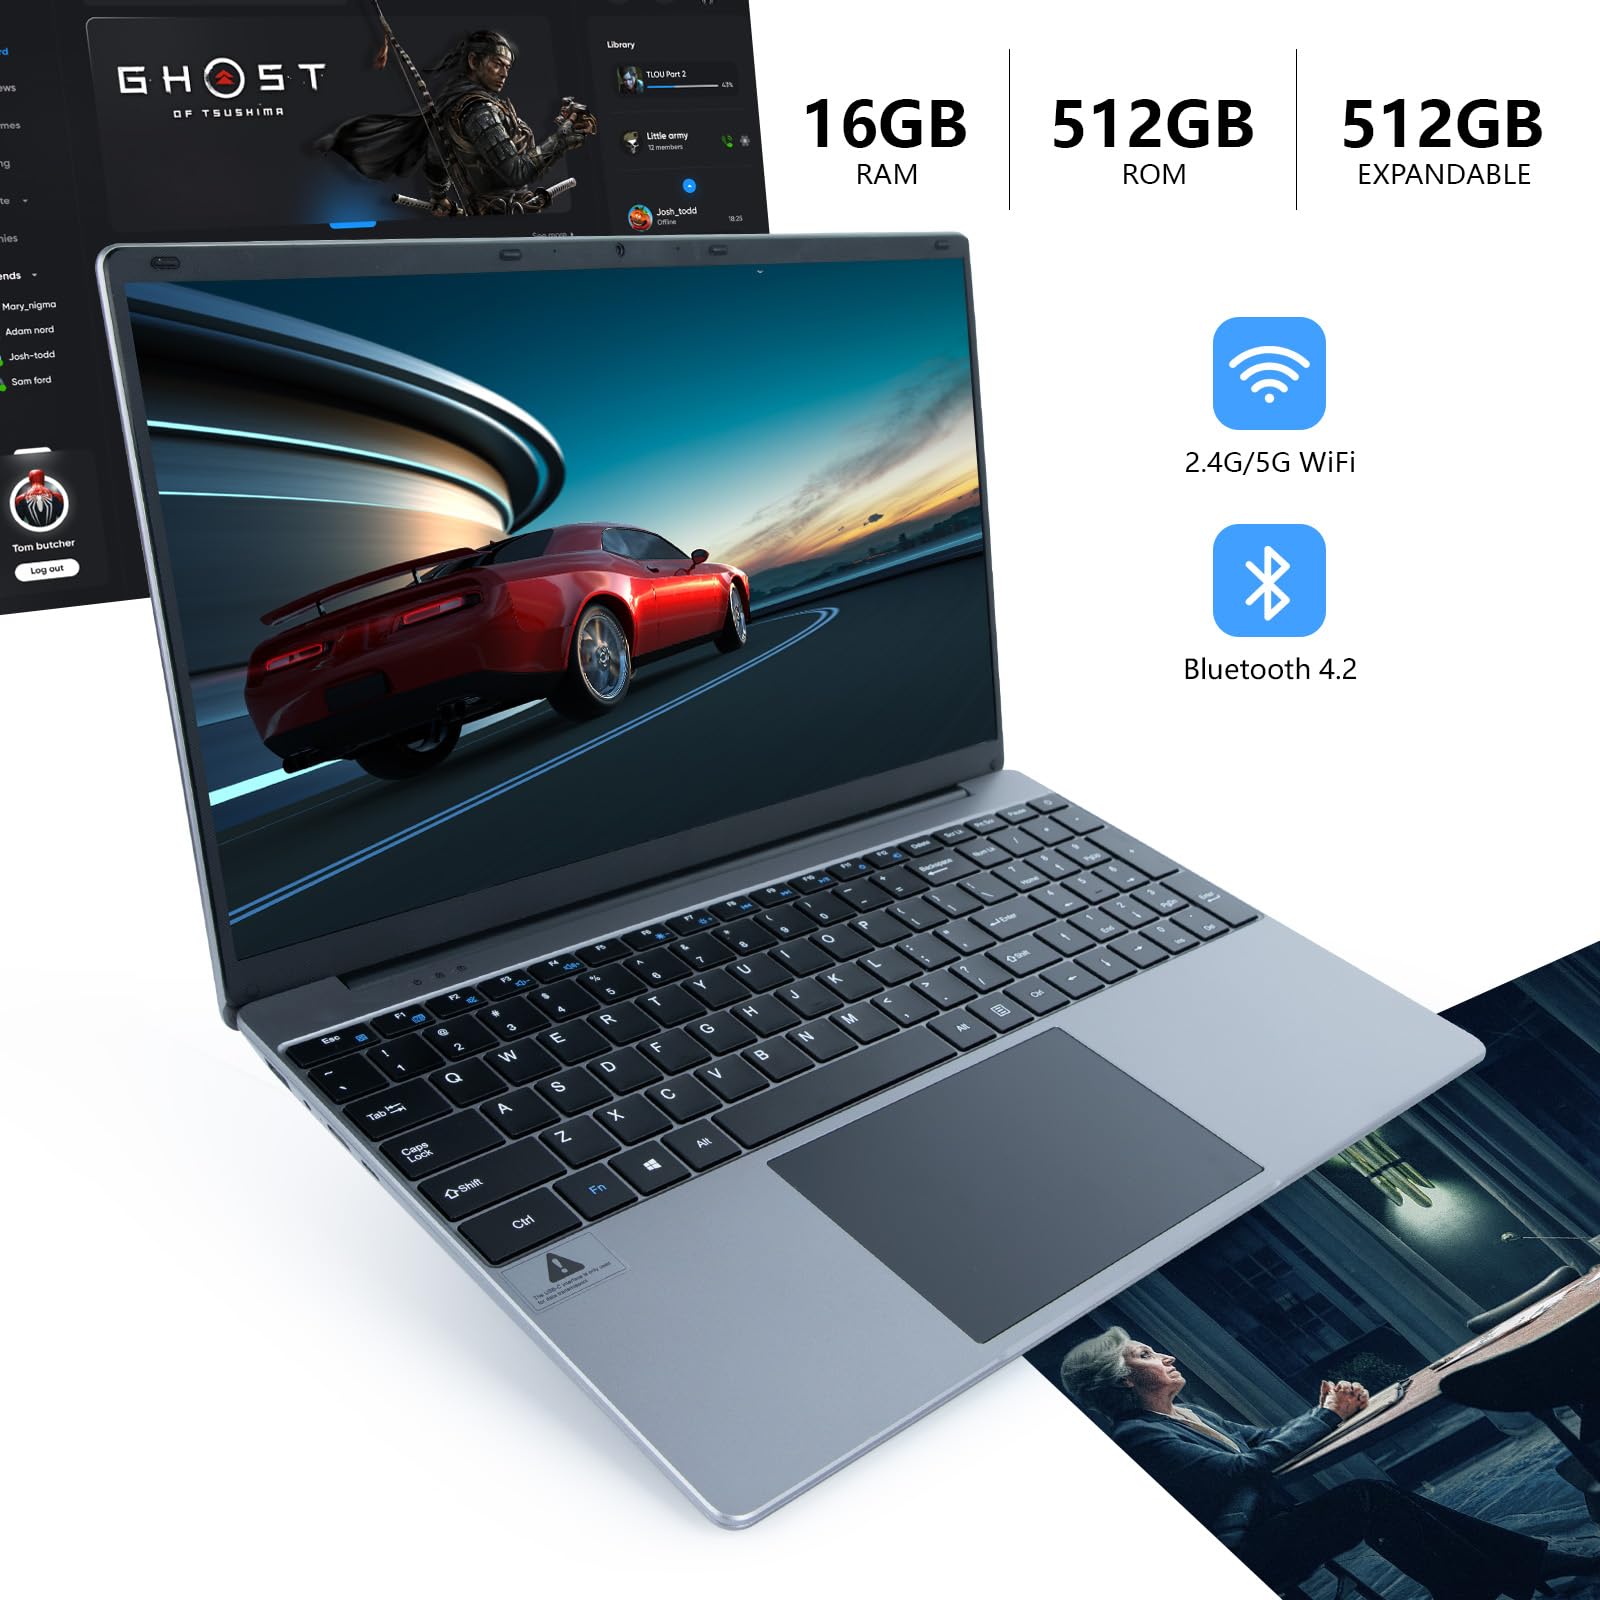 ANMESC Laptop Computer, 16GB RAM 512GB ROM, Celeron Quad-Core Processors, 15.6" 1080P FHD Laptops, 38000mWh Battery, Laptop Computers Support WiFi, Bluetooth, Type-C, TF Card